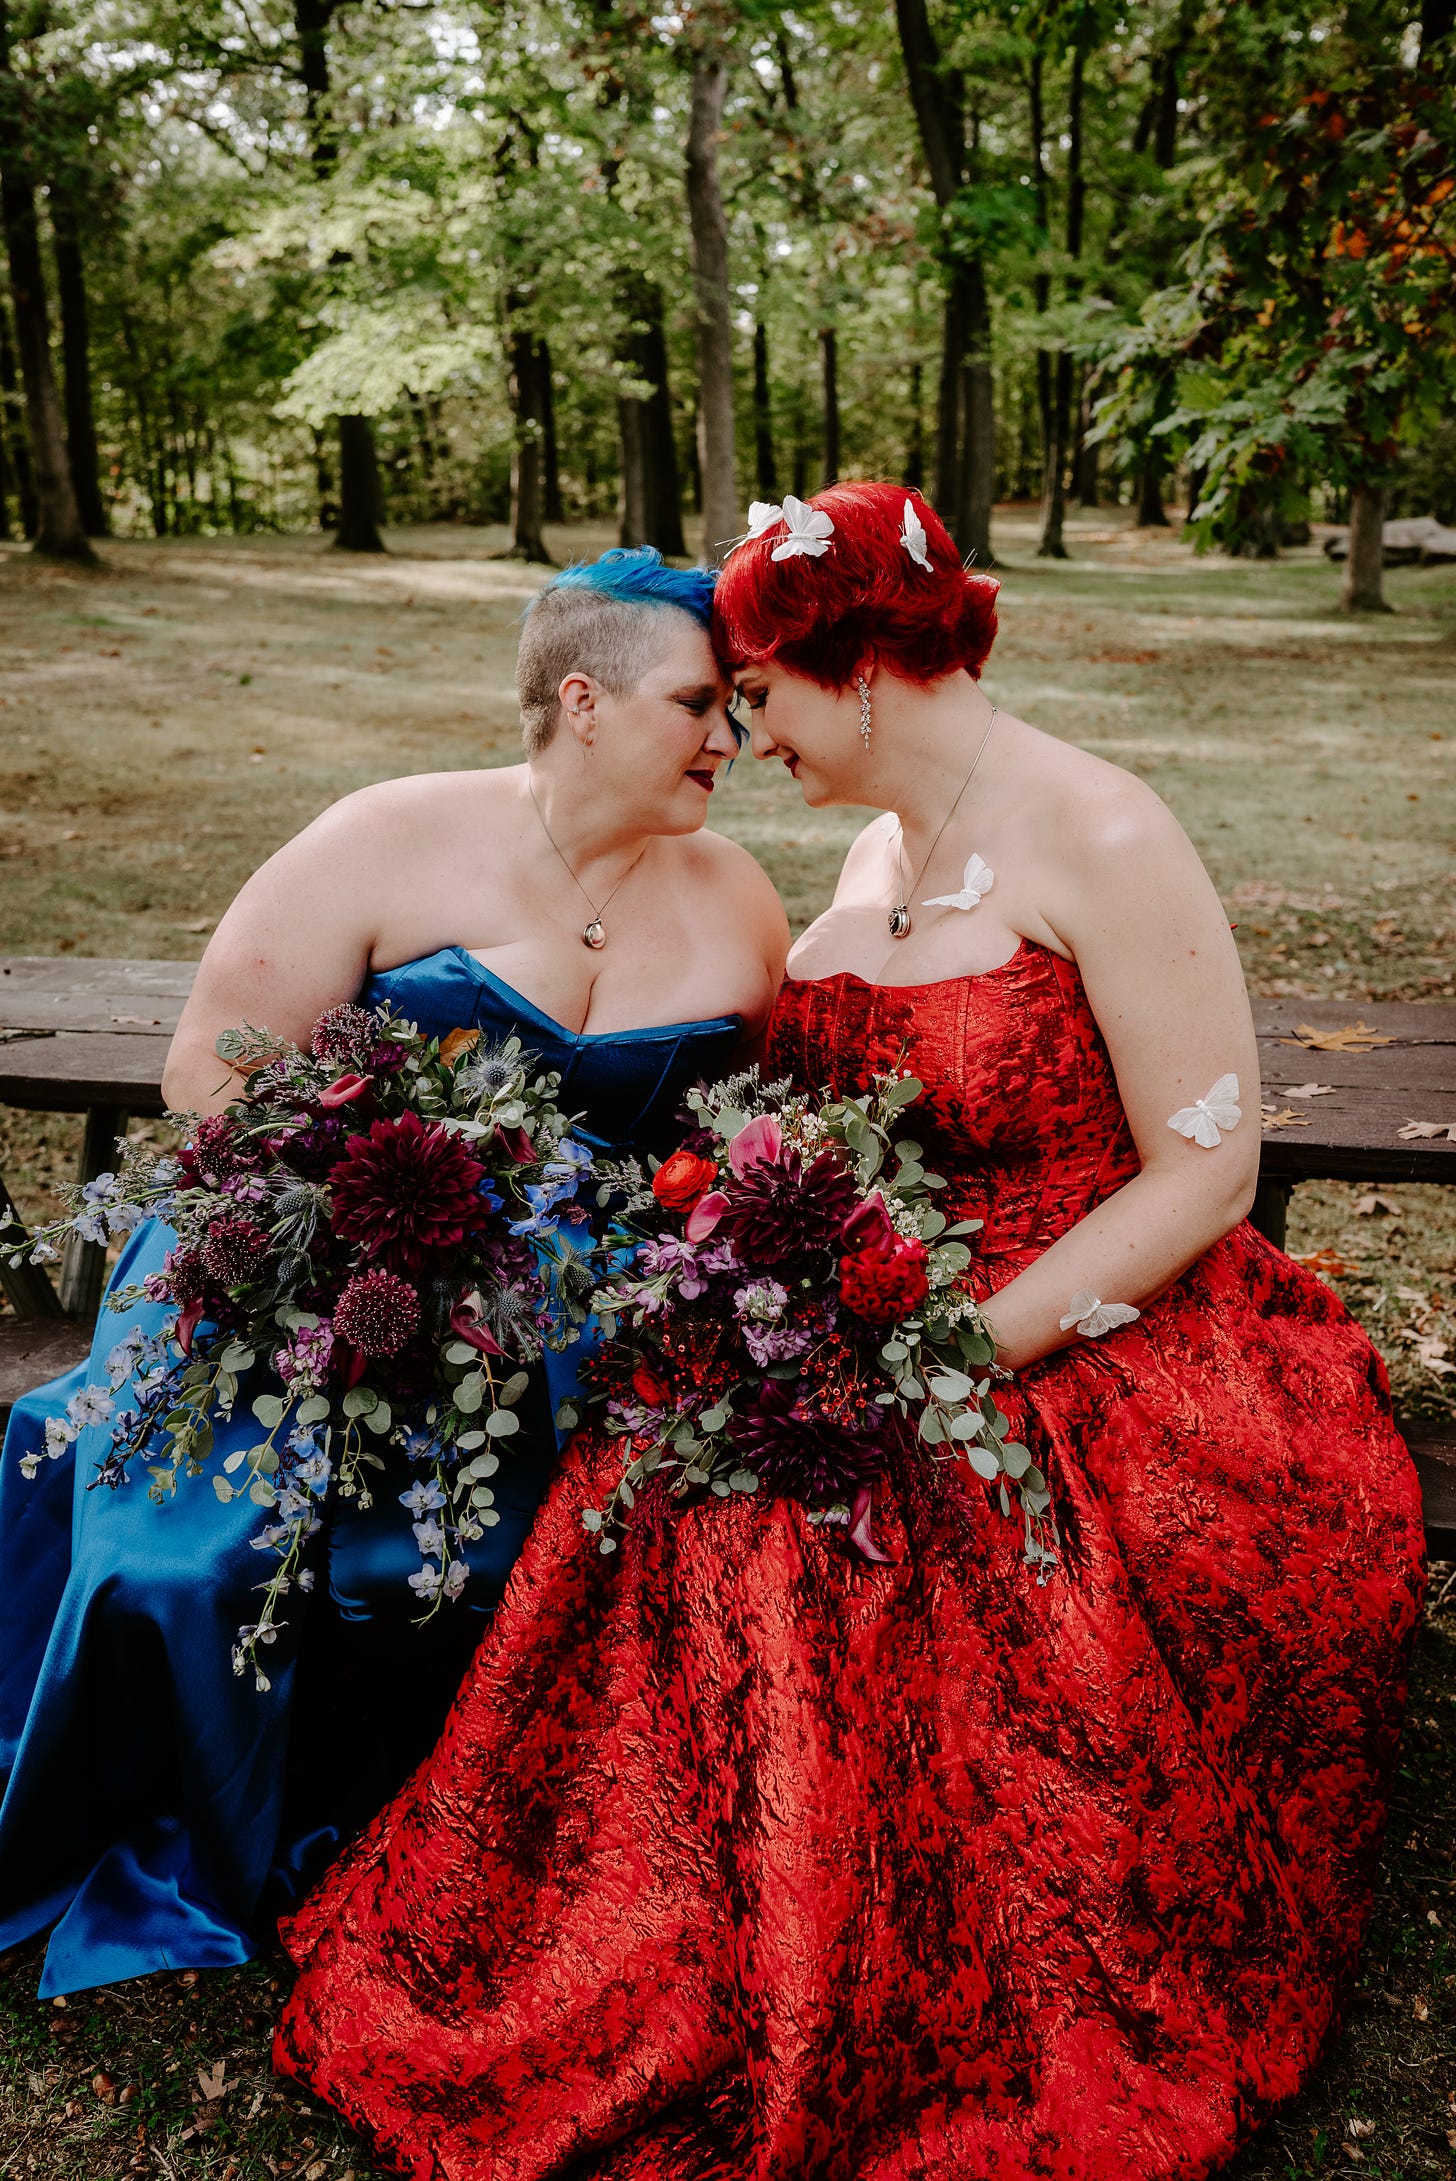 The author and her wife sit at a picnic table, foreheads resting on each others, in red and blue wedding dresses.